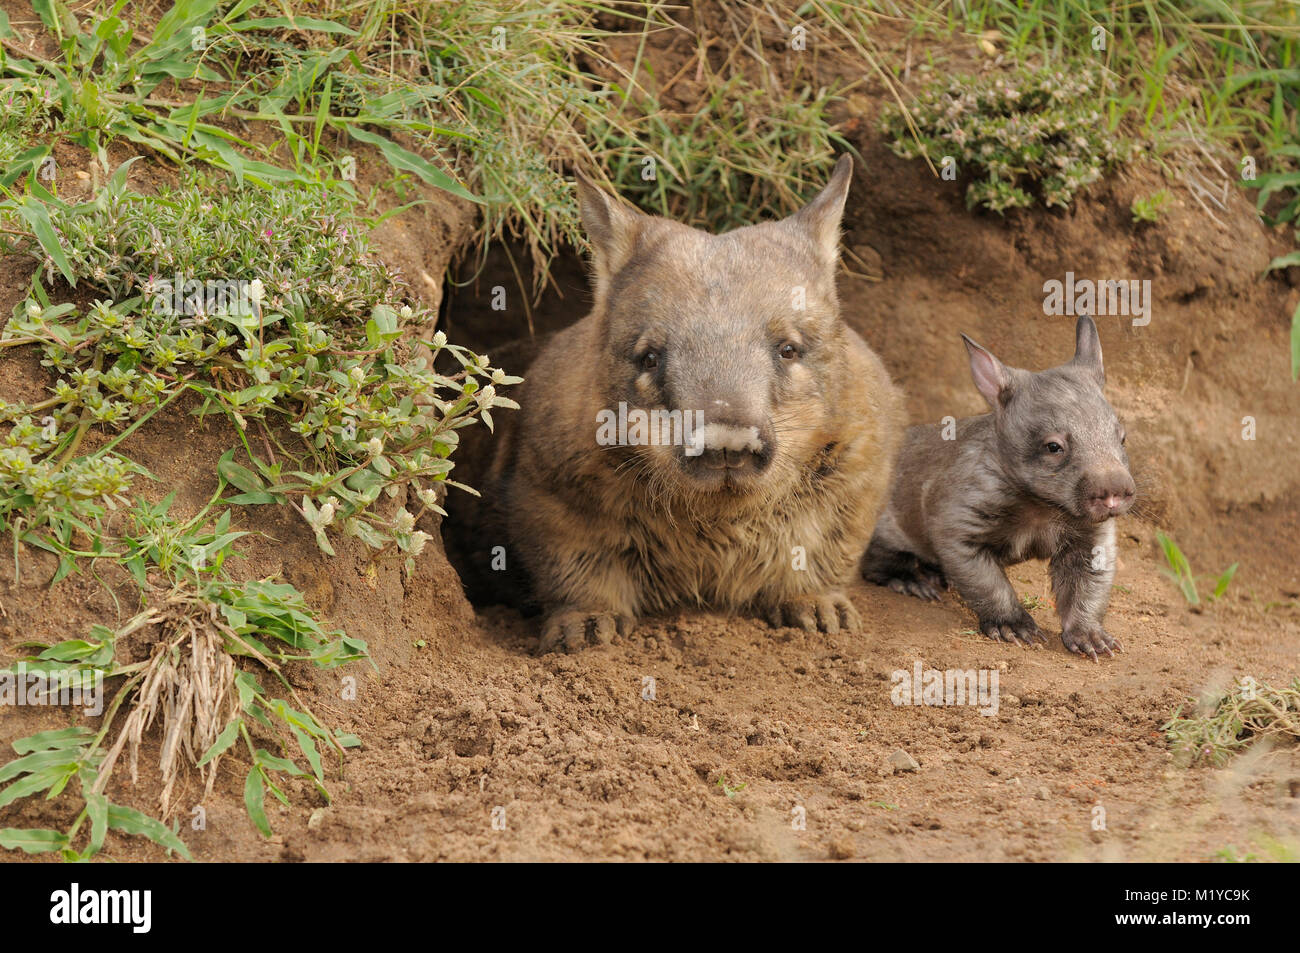 Southern Hairy-nosed Wombat Lasiorhinus latifrons Adult and young at burrow entrance Captive Photographed in Queensland, Australia Stock Photo